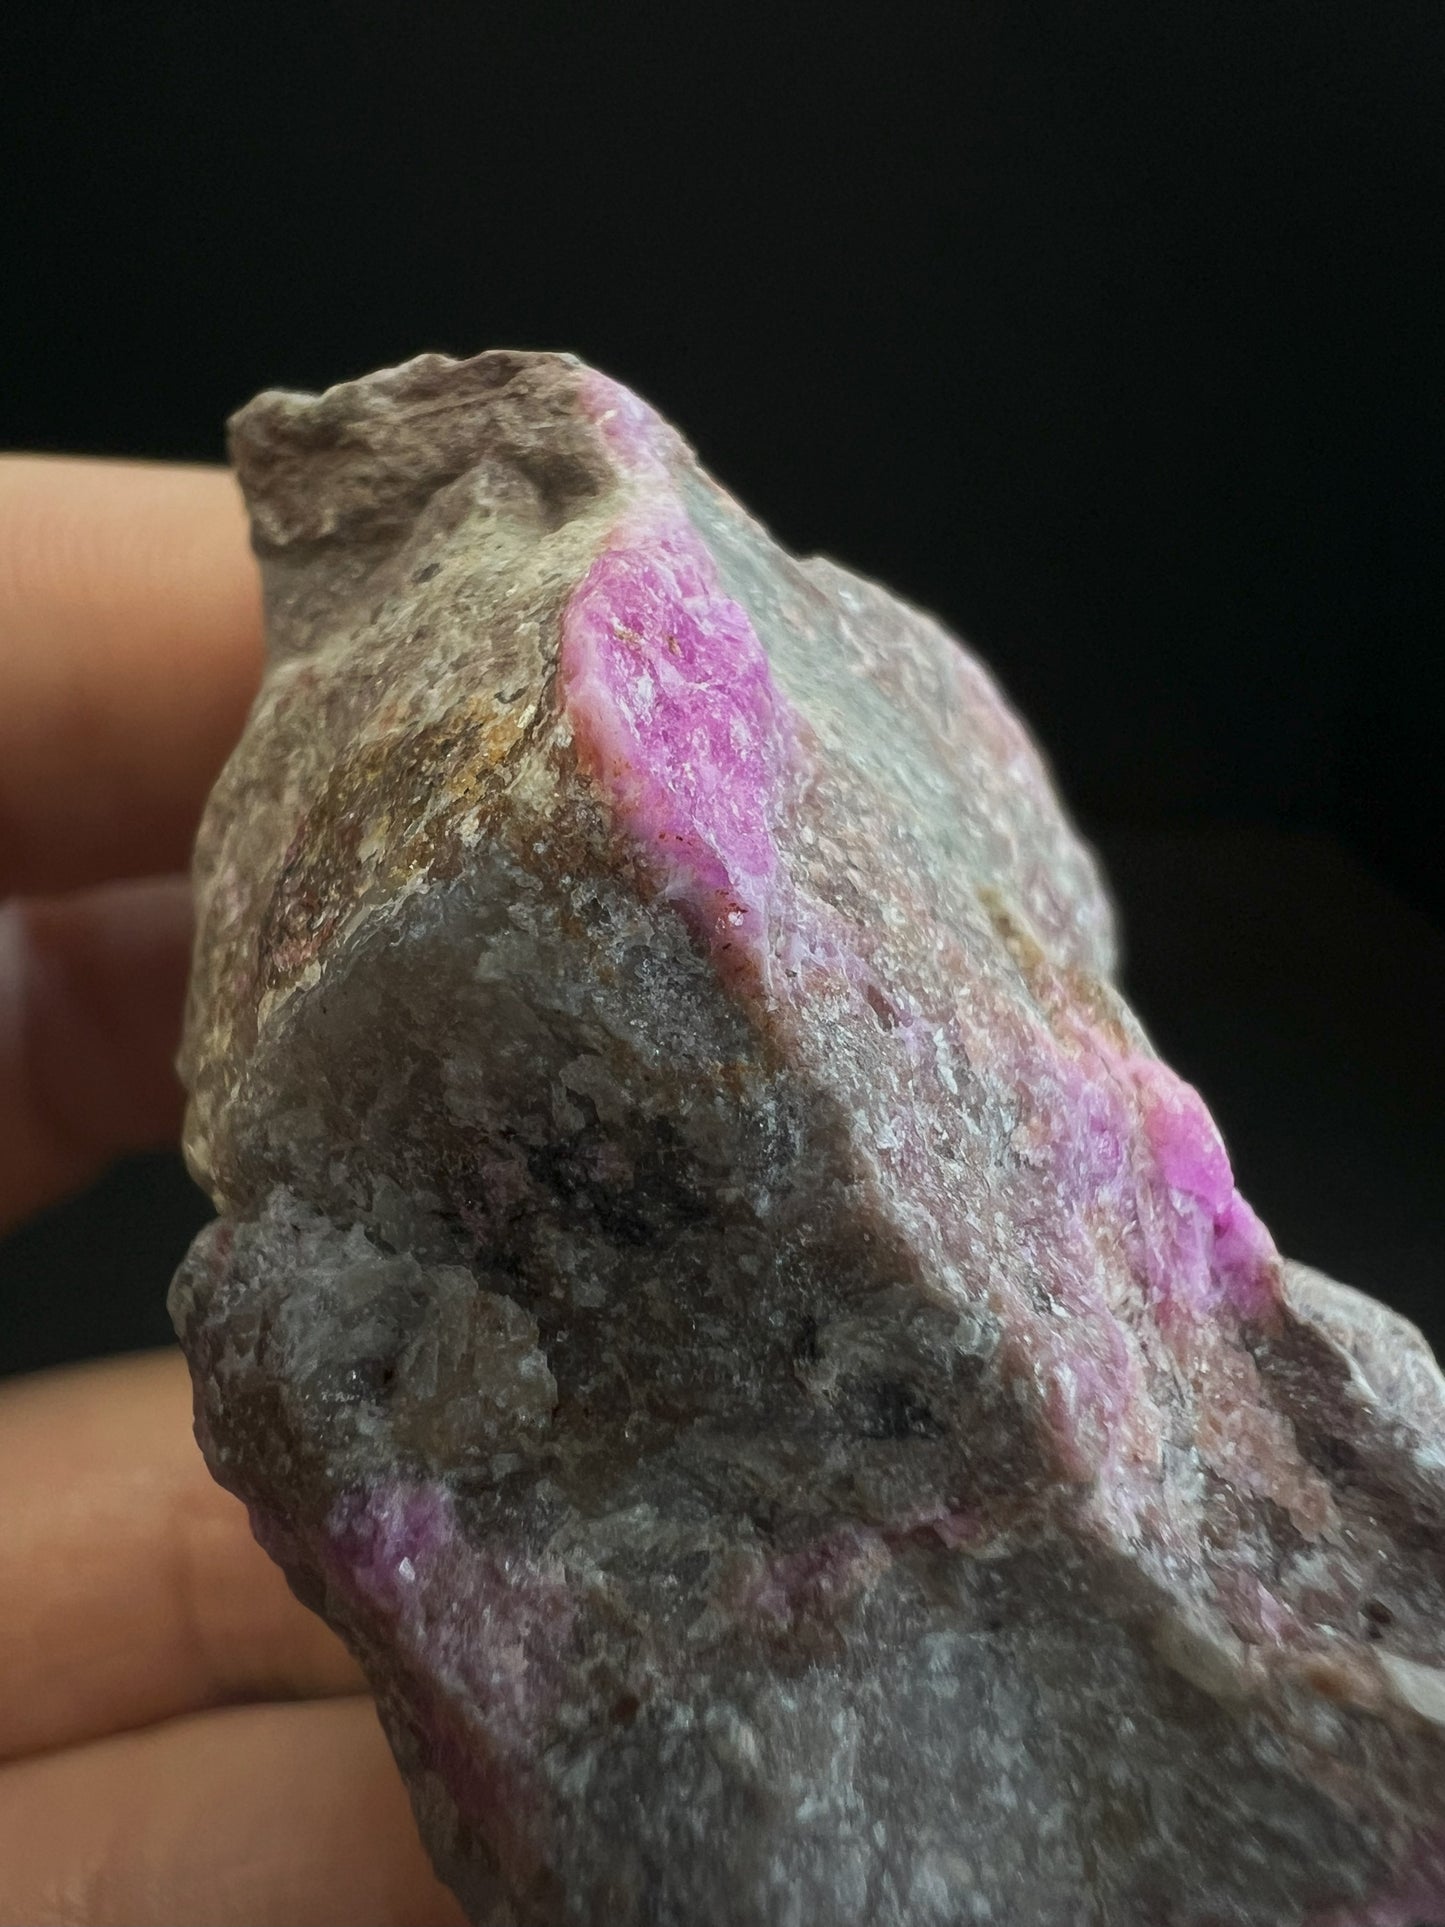 Gorgeous Pink Cobalt Calcite On Matrix From Morocco- Gift, Crystal Healing